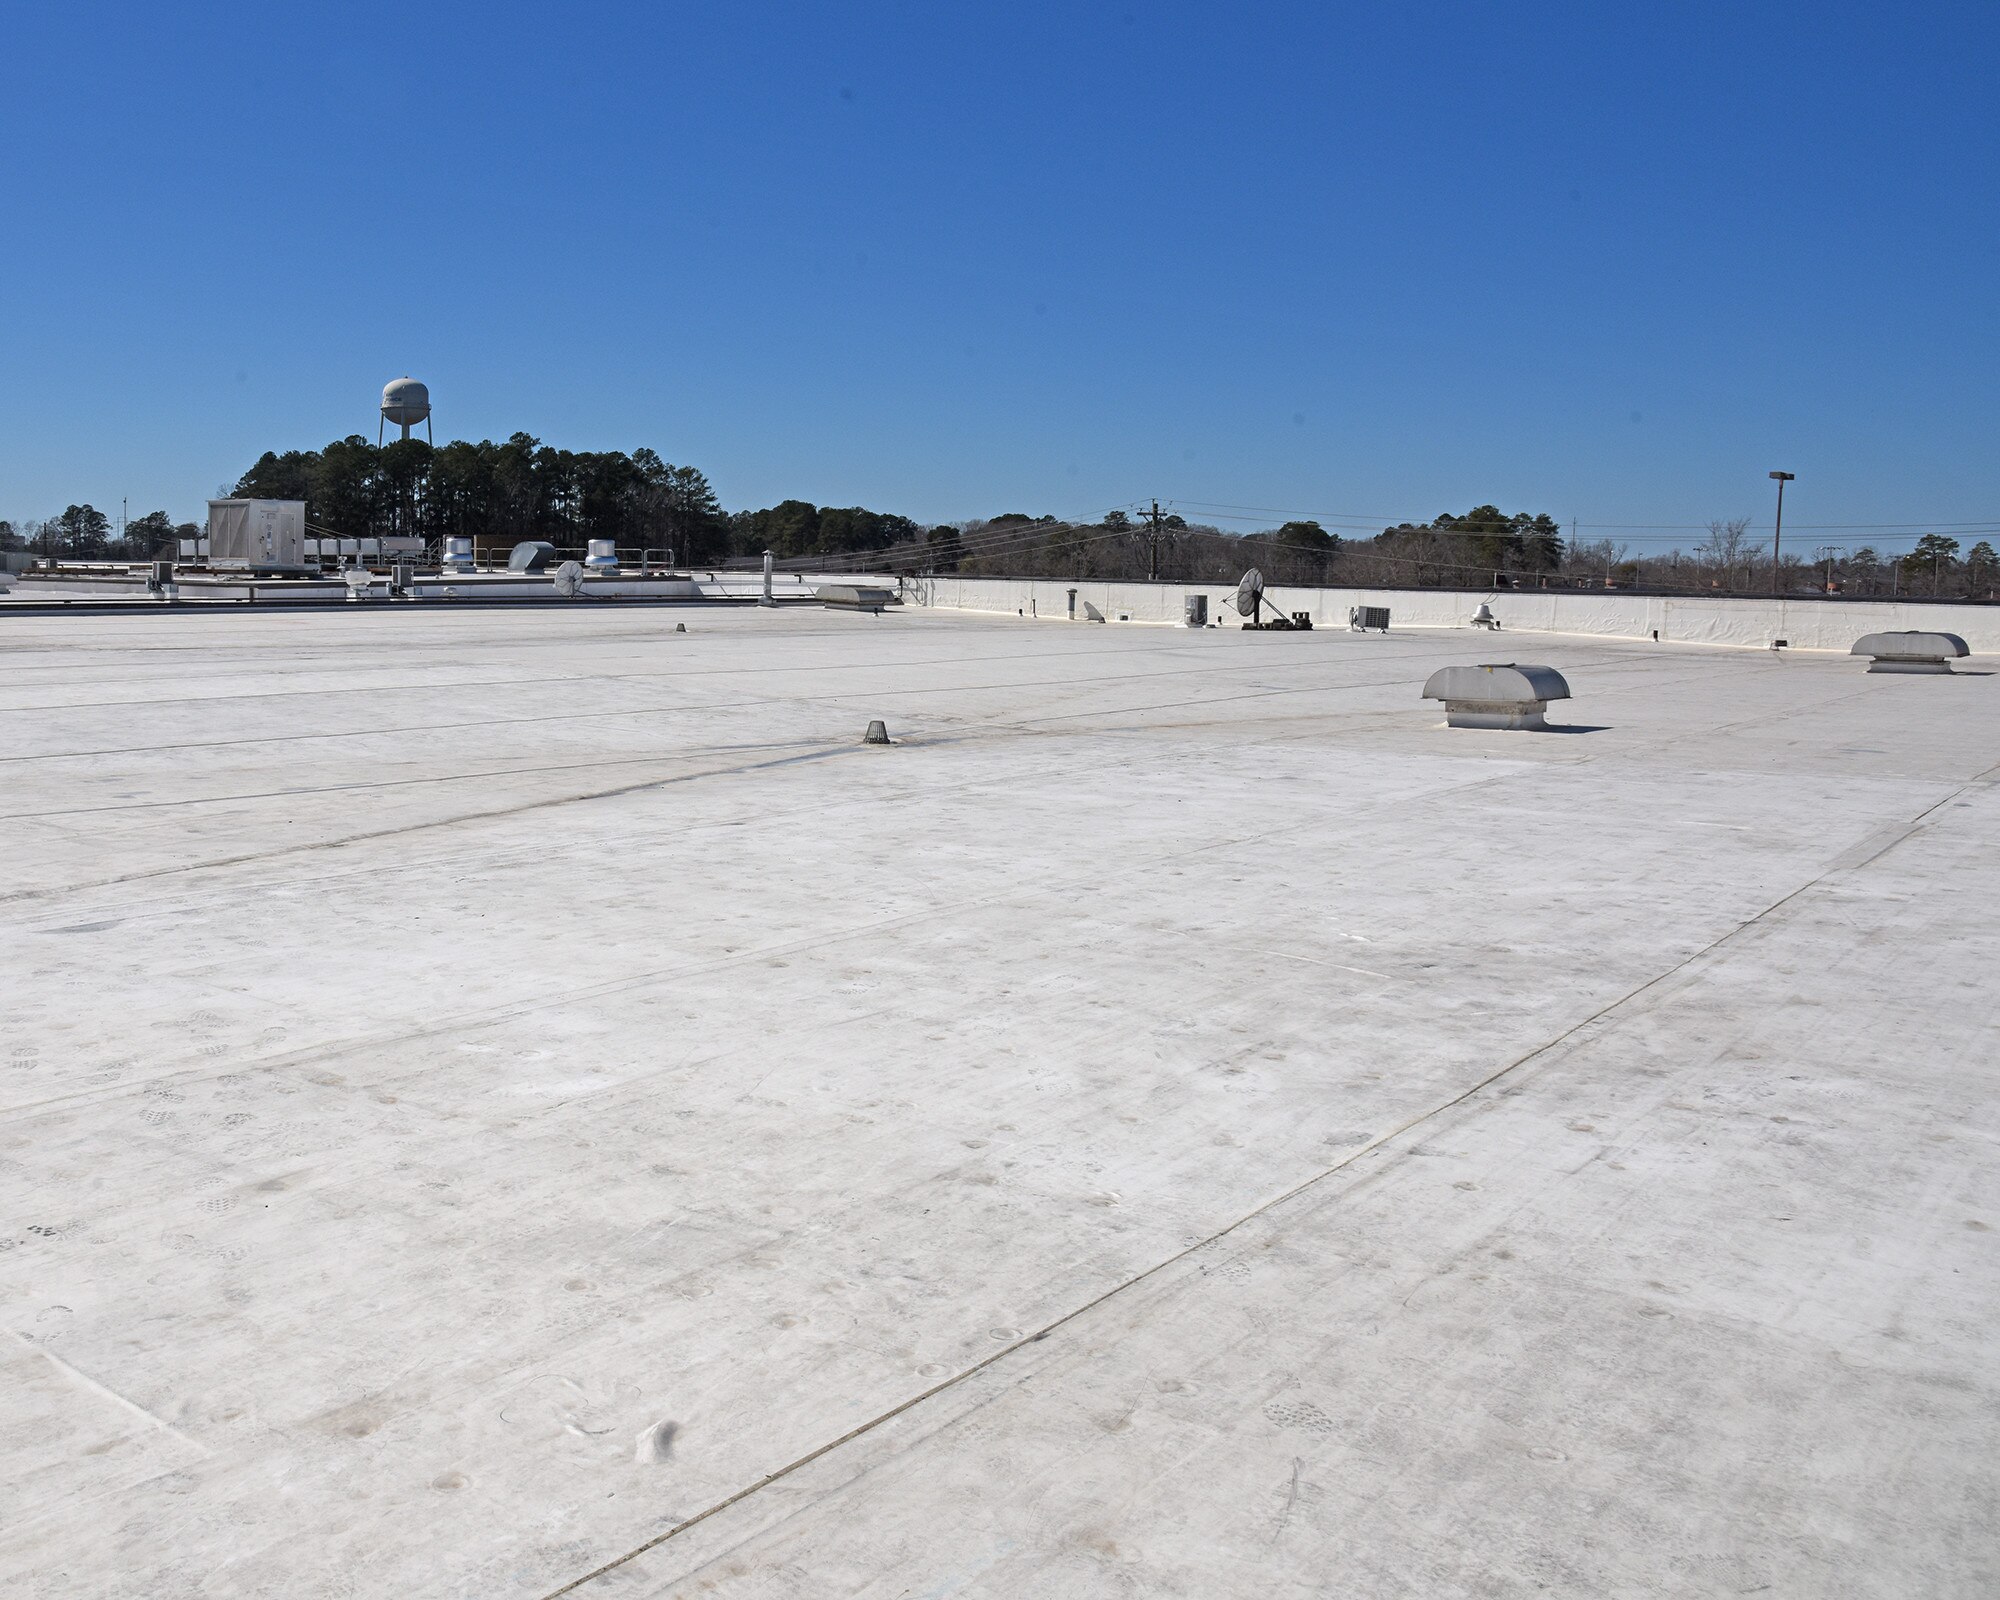 The replacement roof was completed in January of 2021. The 14th Contracting Squadron has a 20 year warranty on the roof. (Courtesy photo)